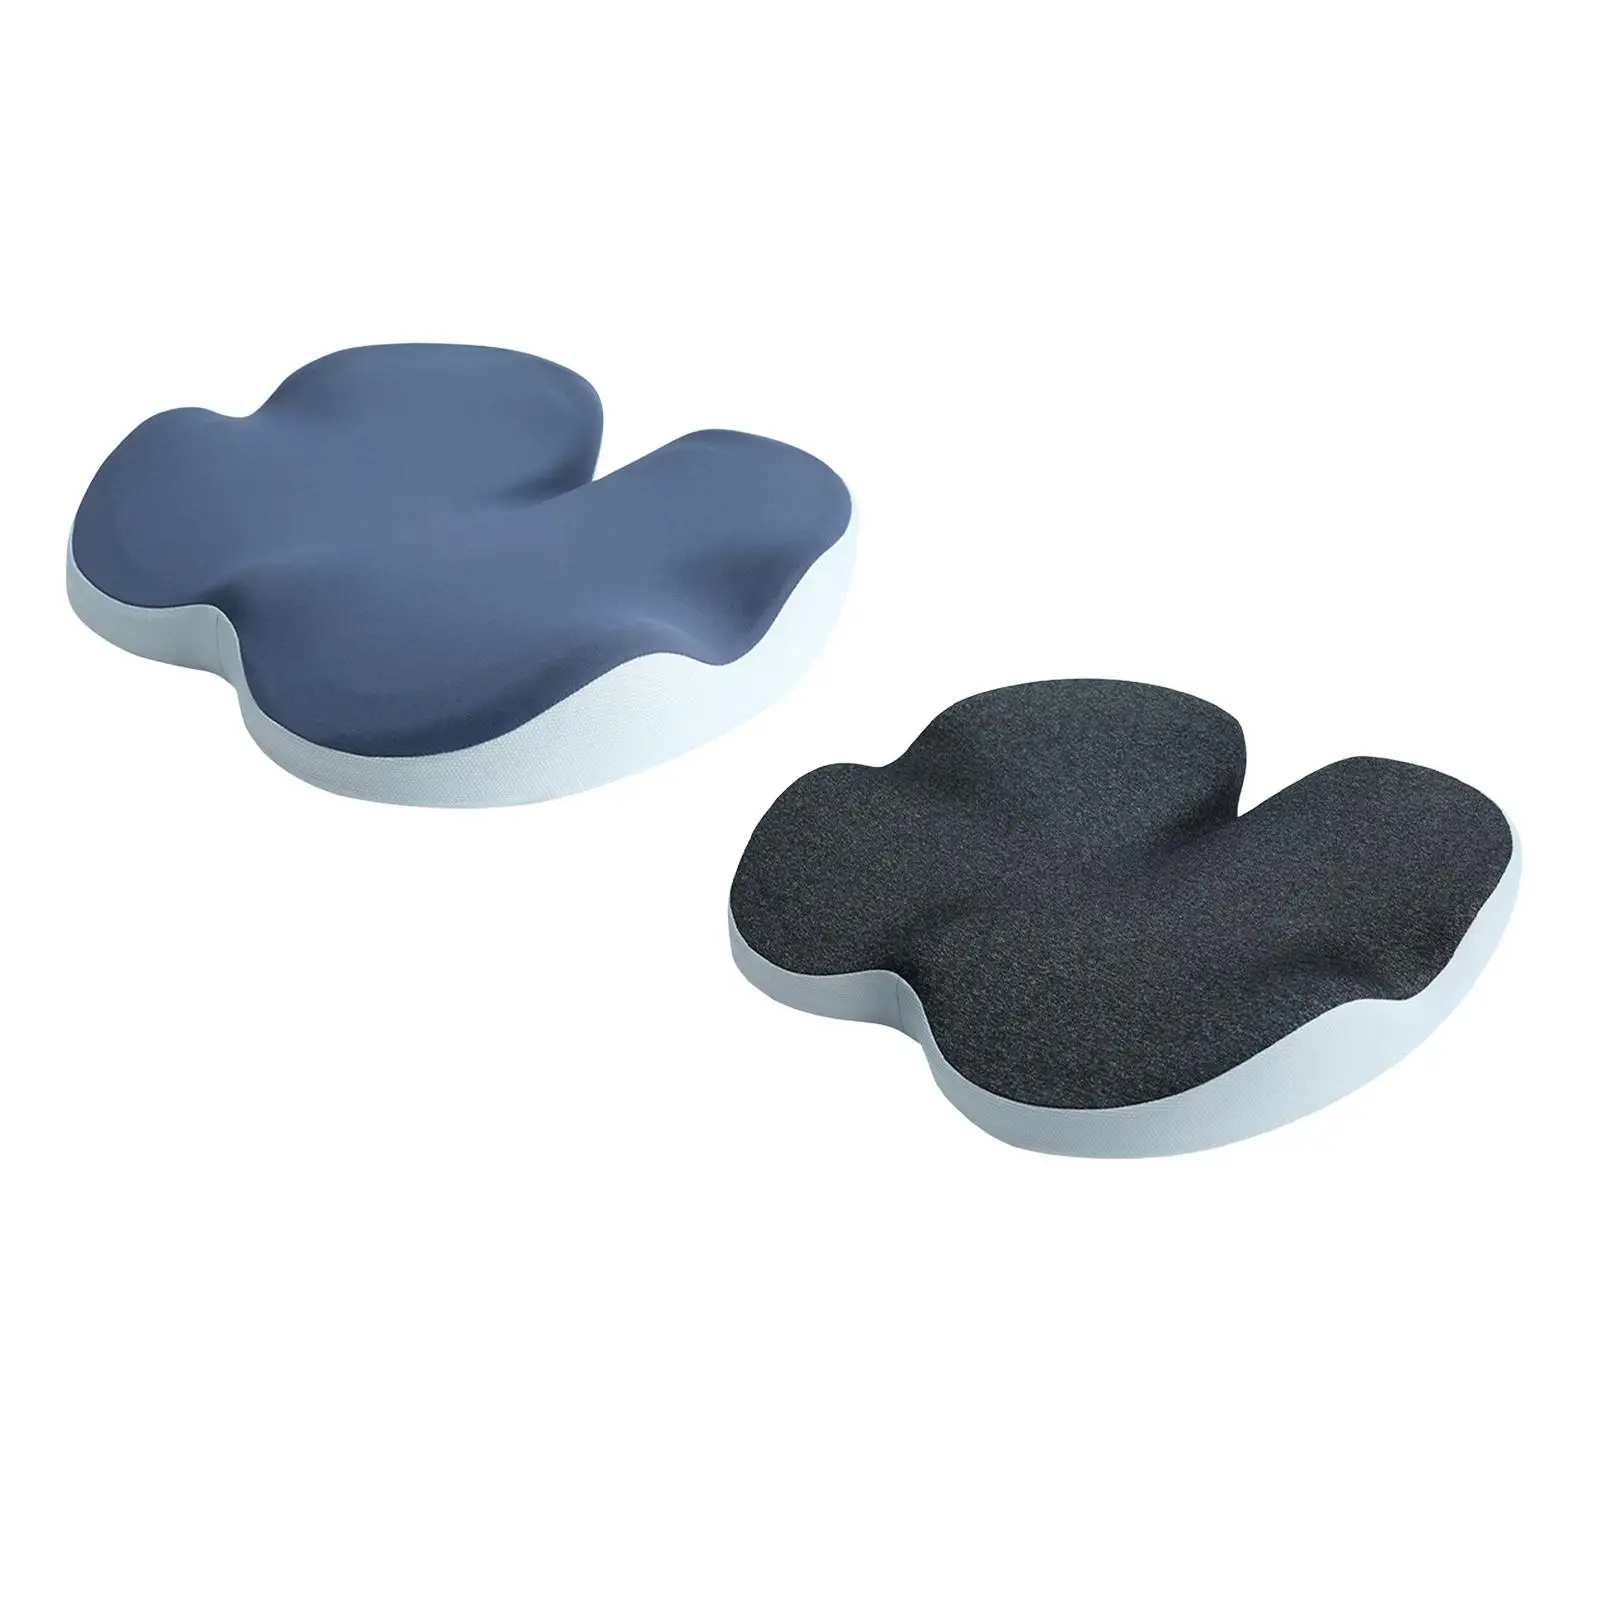 Ergonomic Seat Cushion Pillow: Foam Chair Pad With Washable Cover